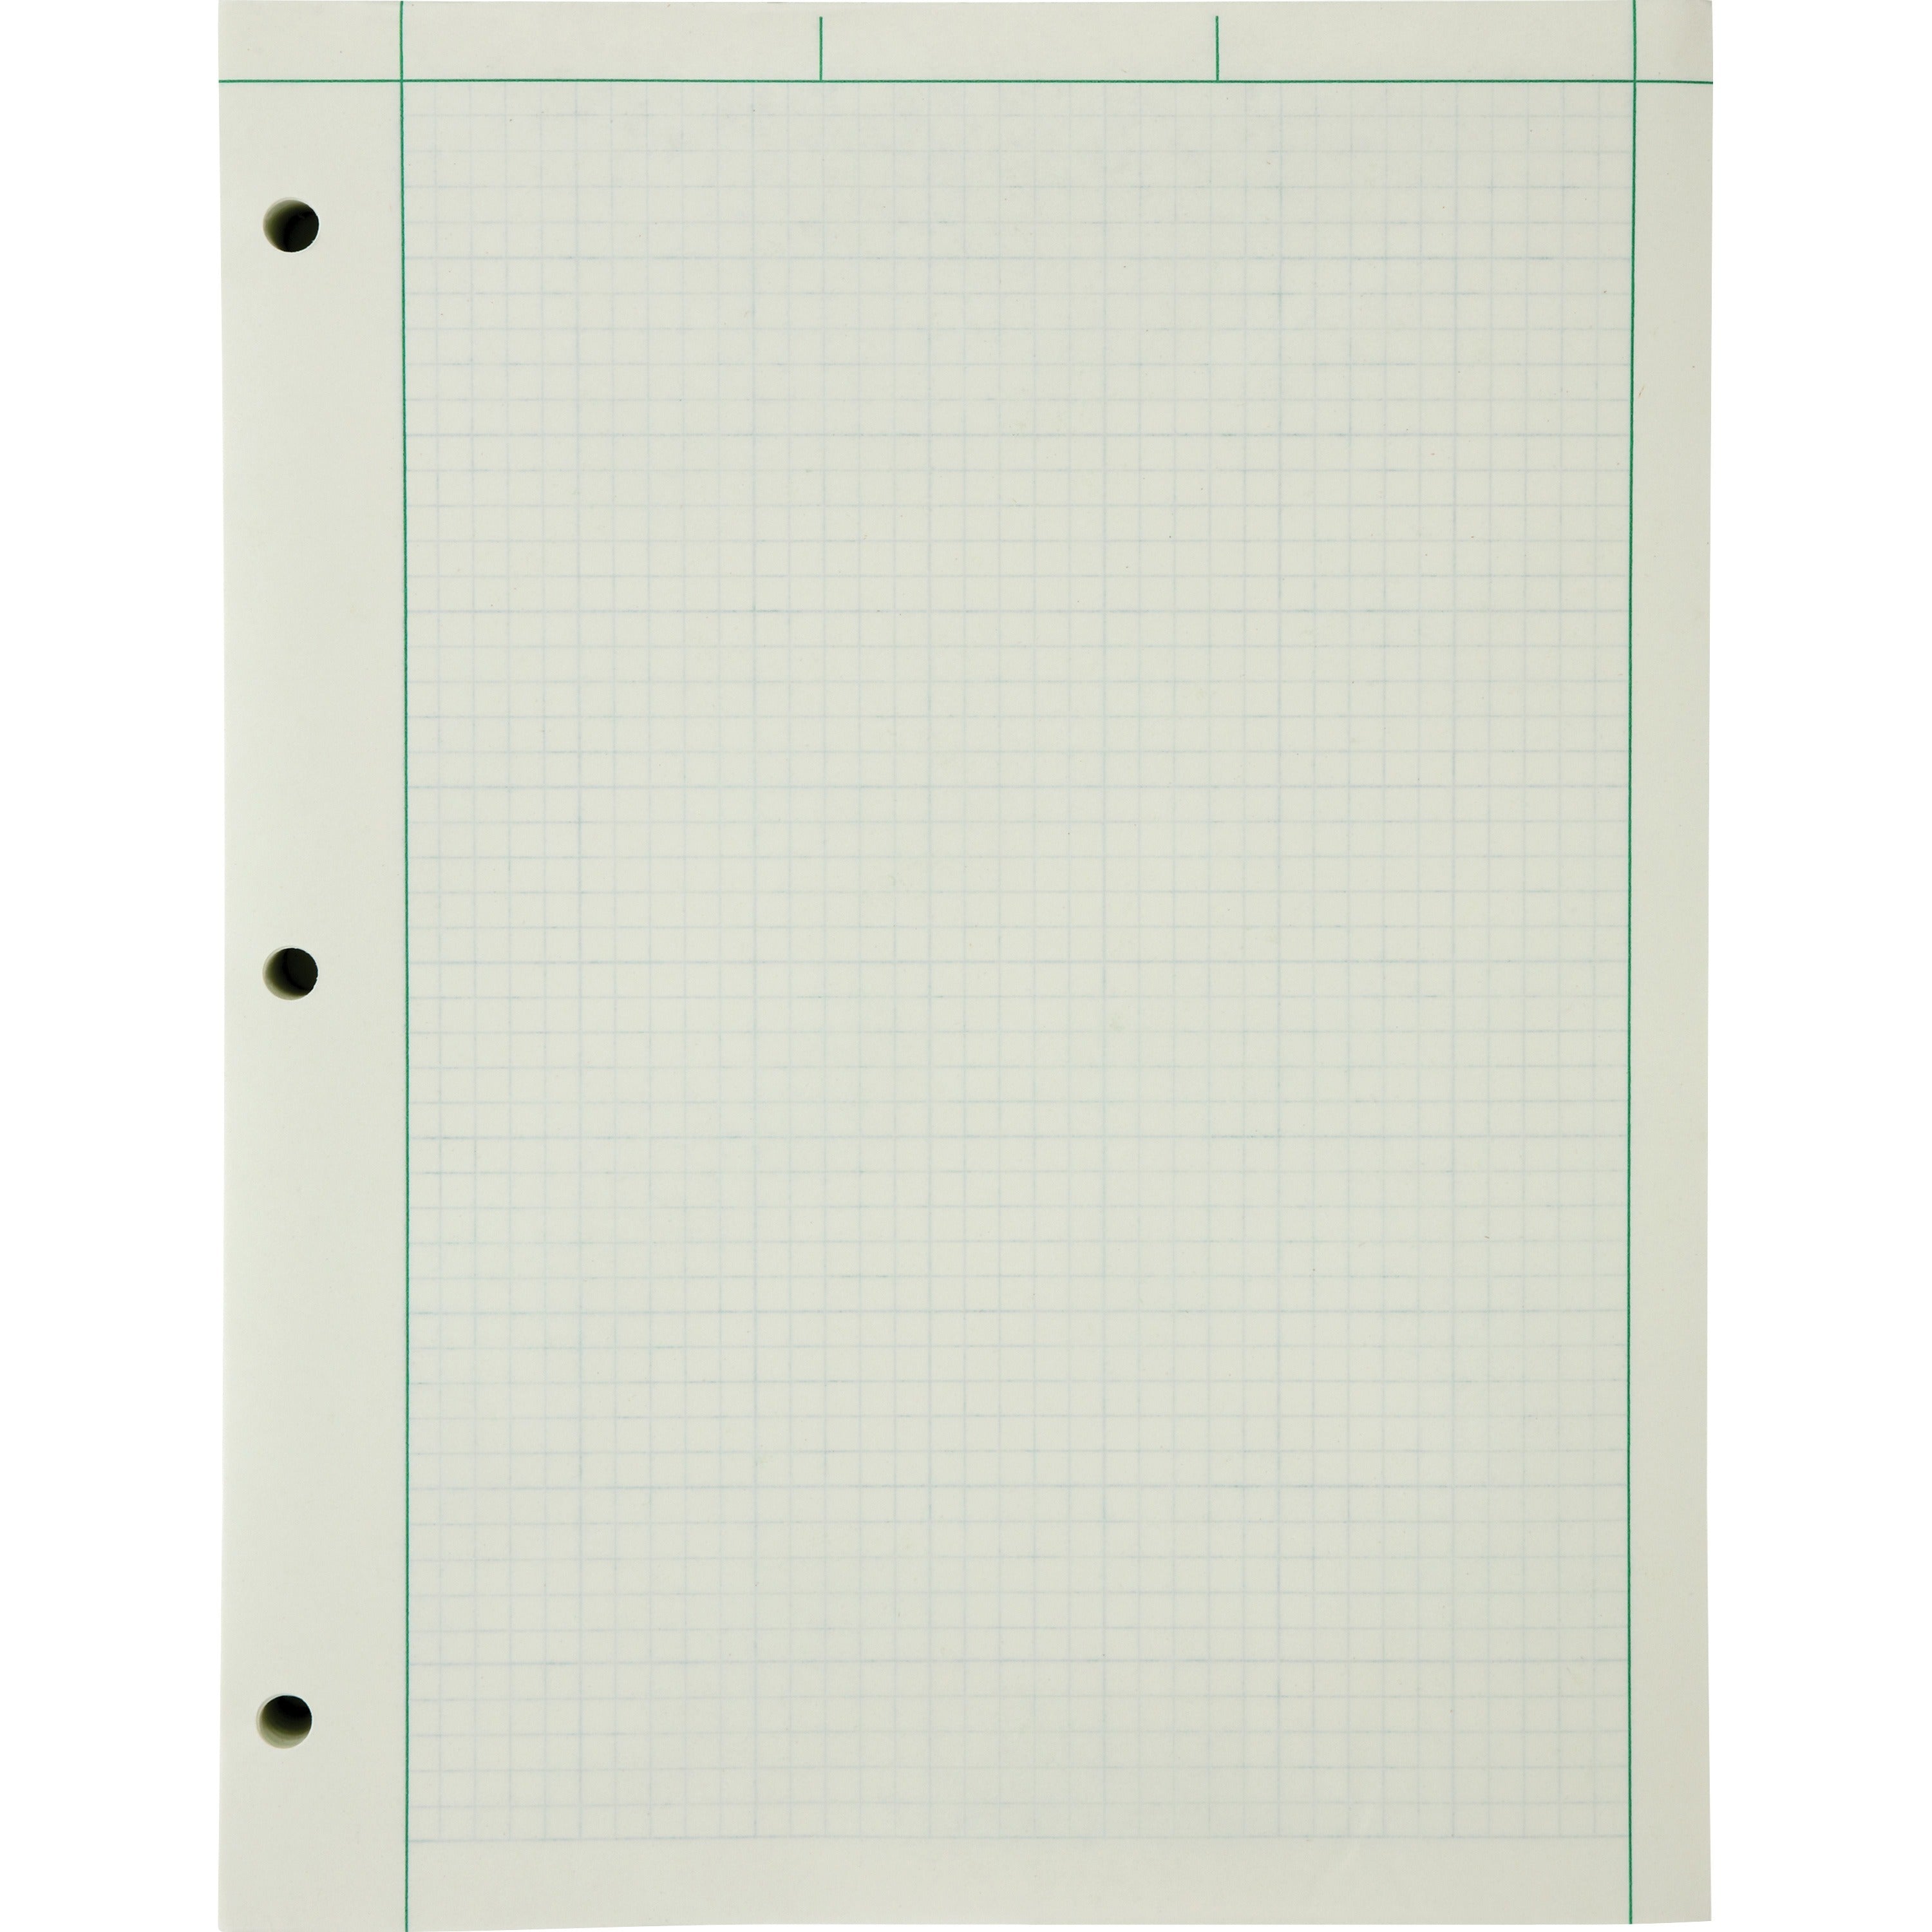 Ampad Green Tint Engineer's Quadrille Pad, Sold as 1 Pad - 1